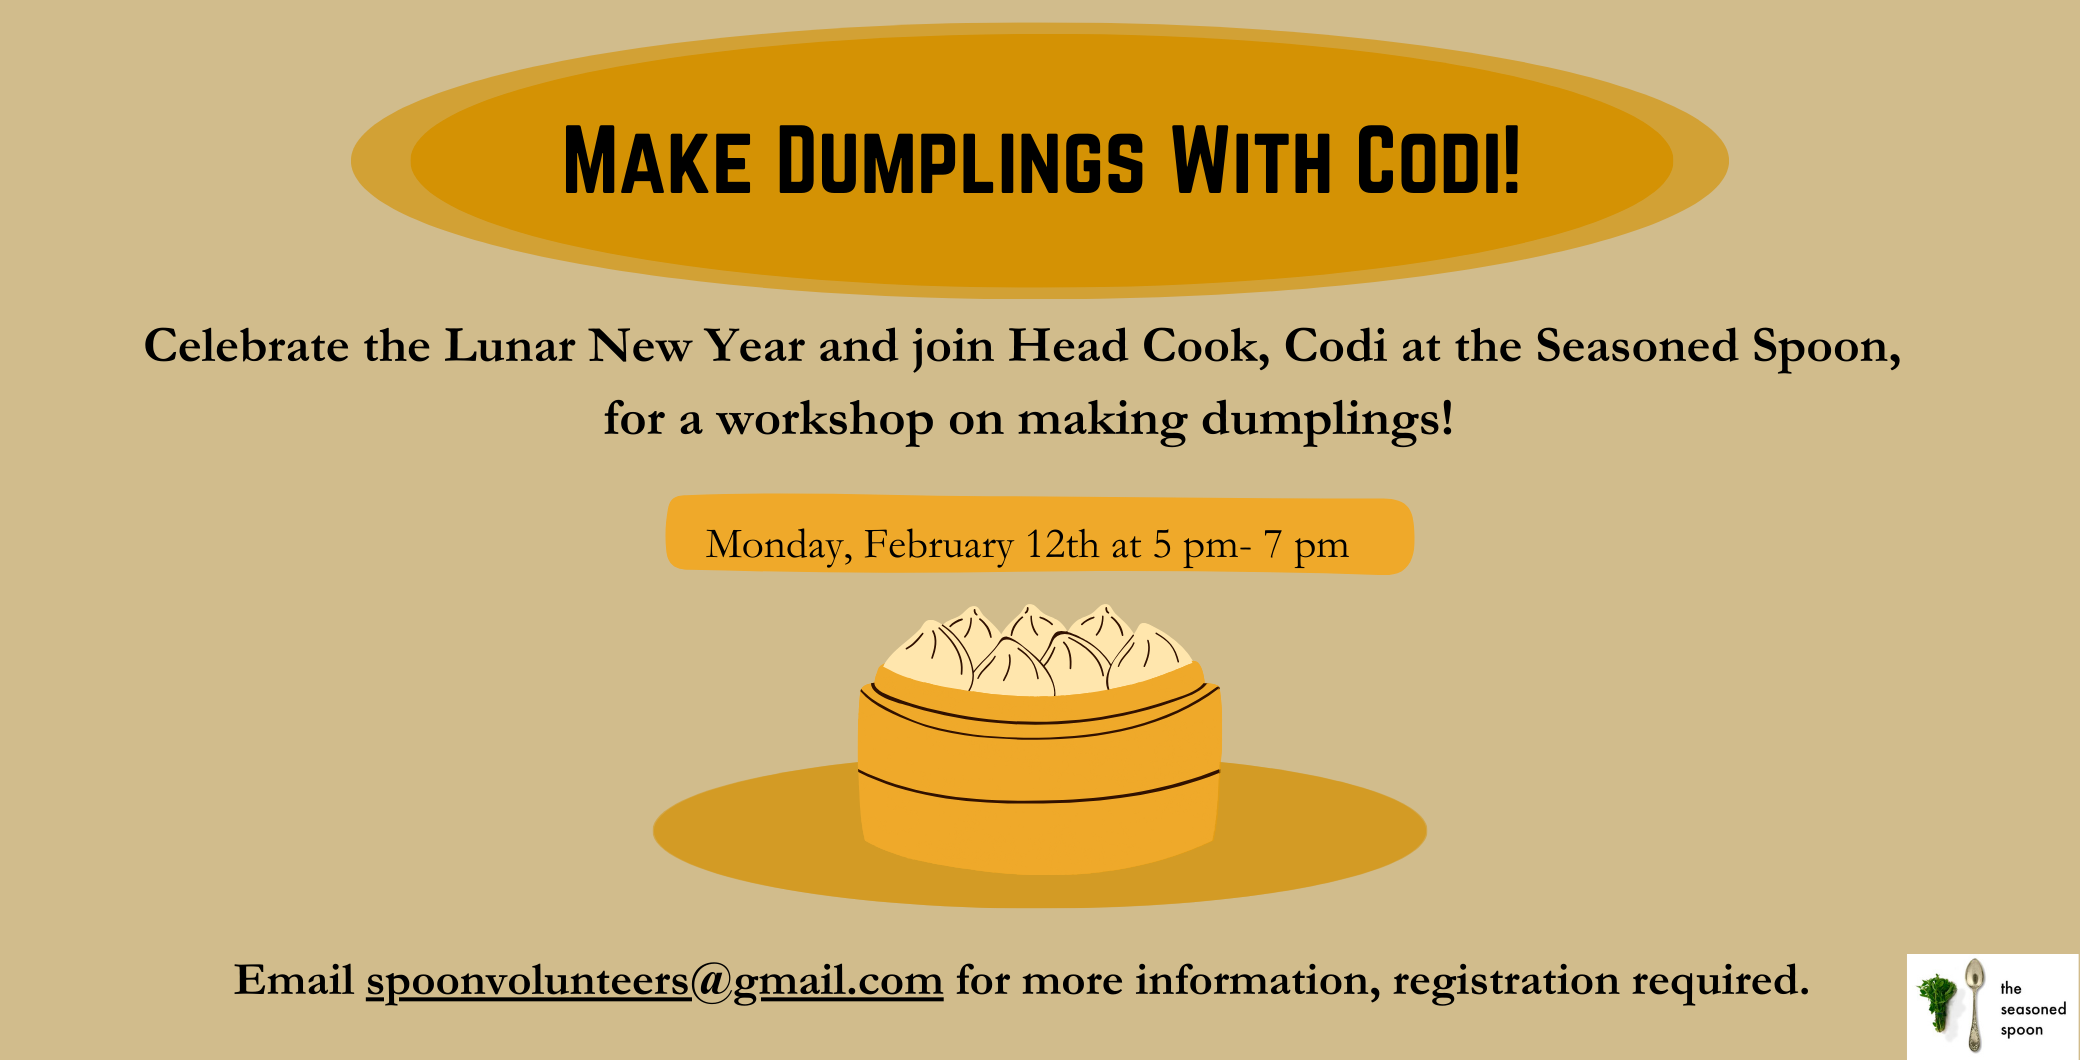 Join head cook, Codi, from the Seasoned Spoon to celebrate the Lunar new year and learn how to make dumplings.